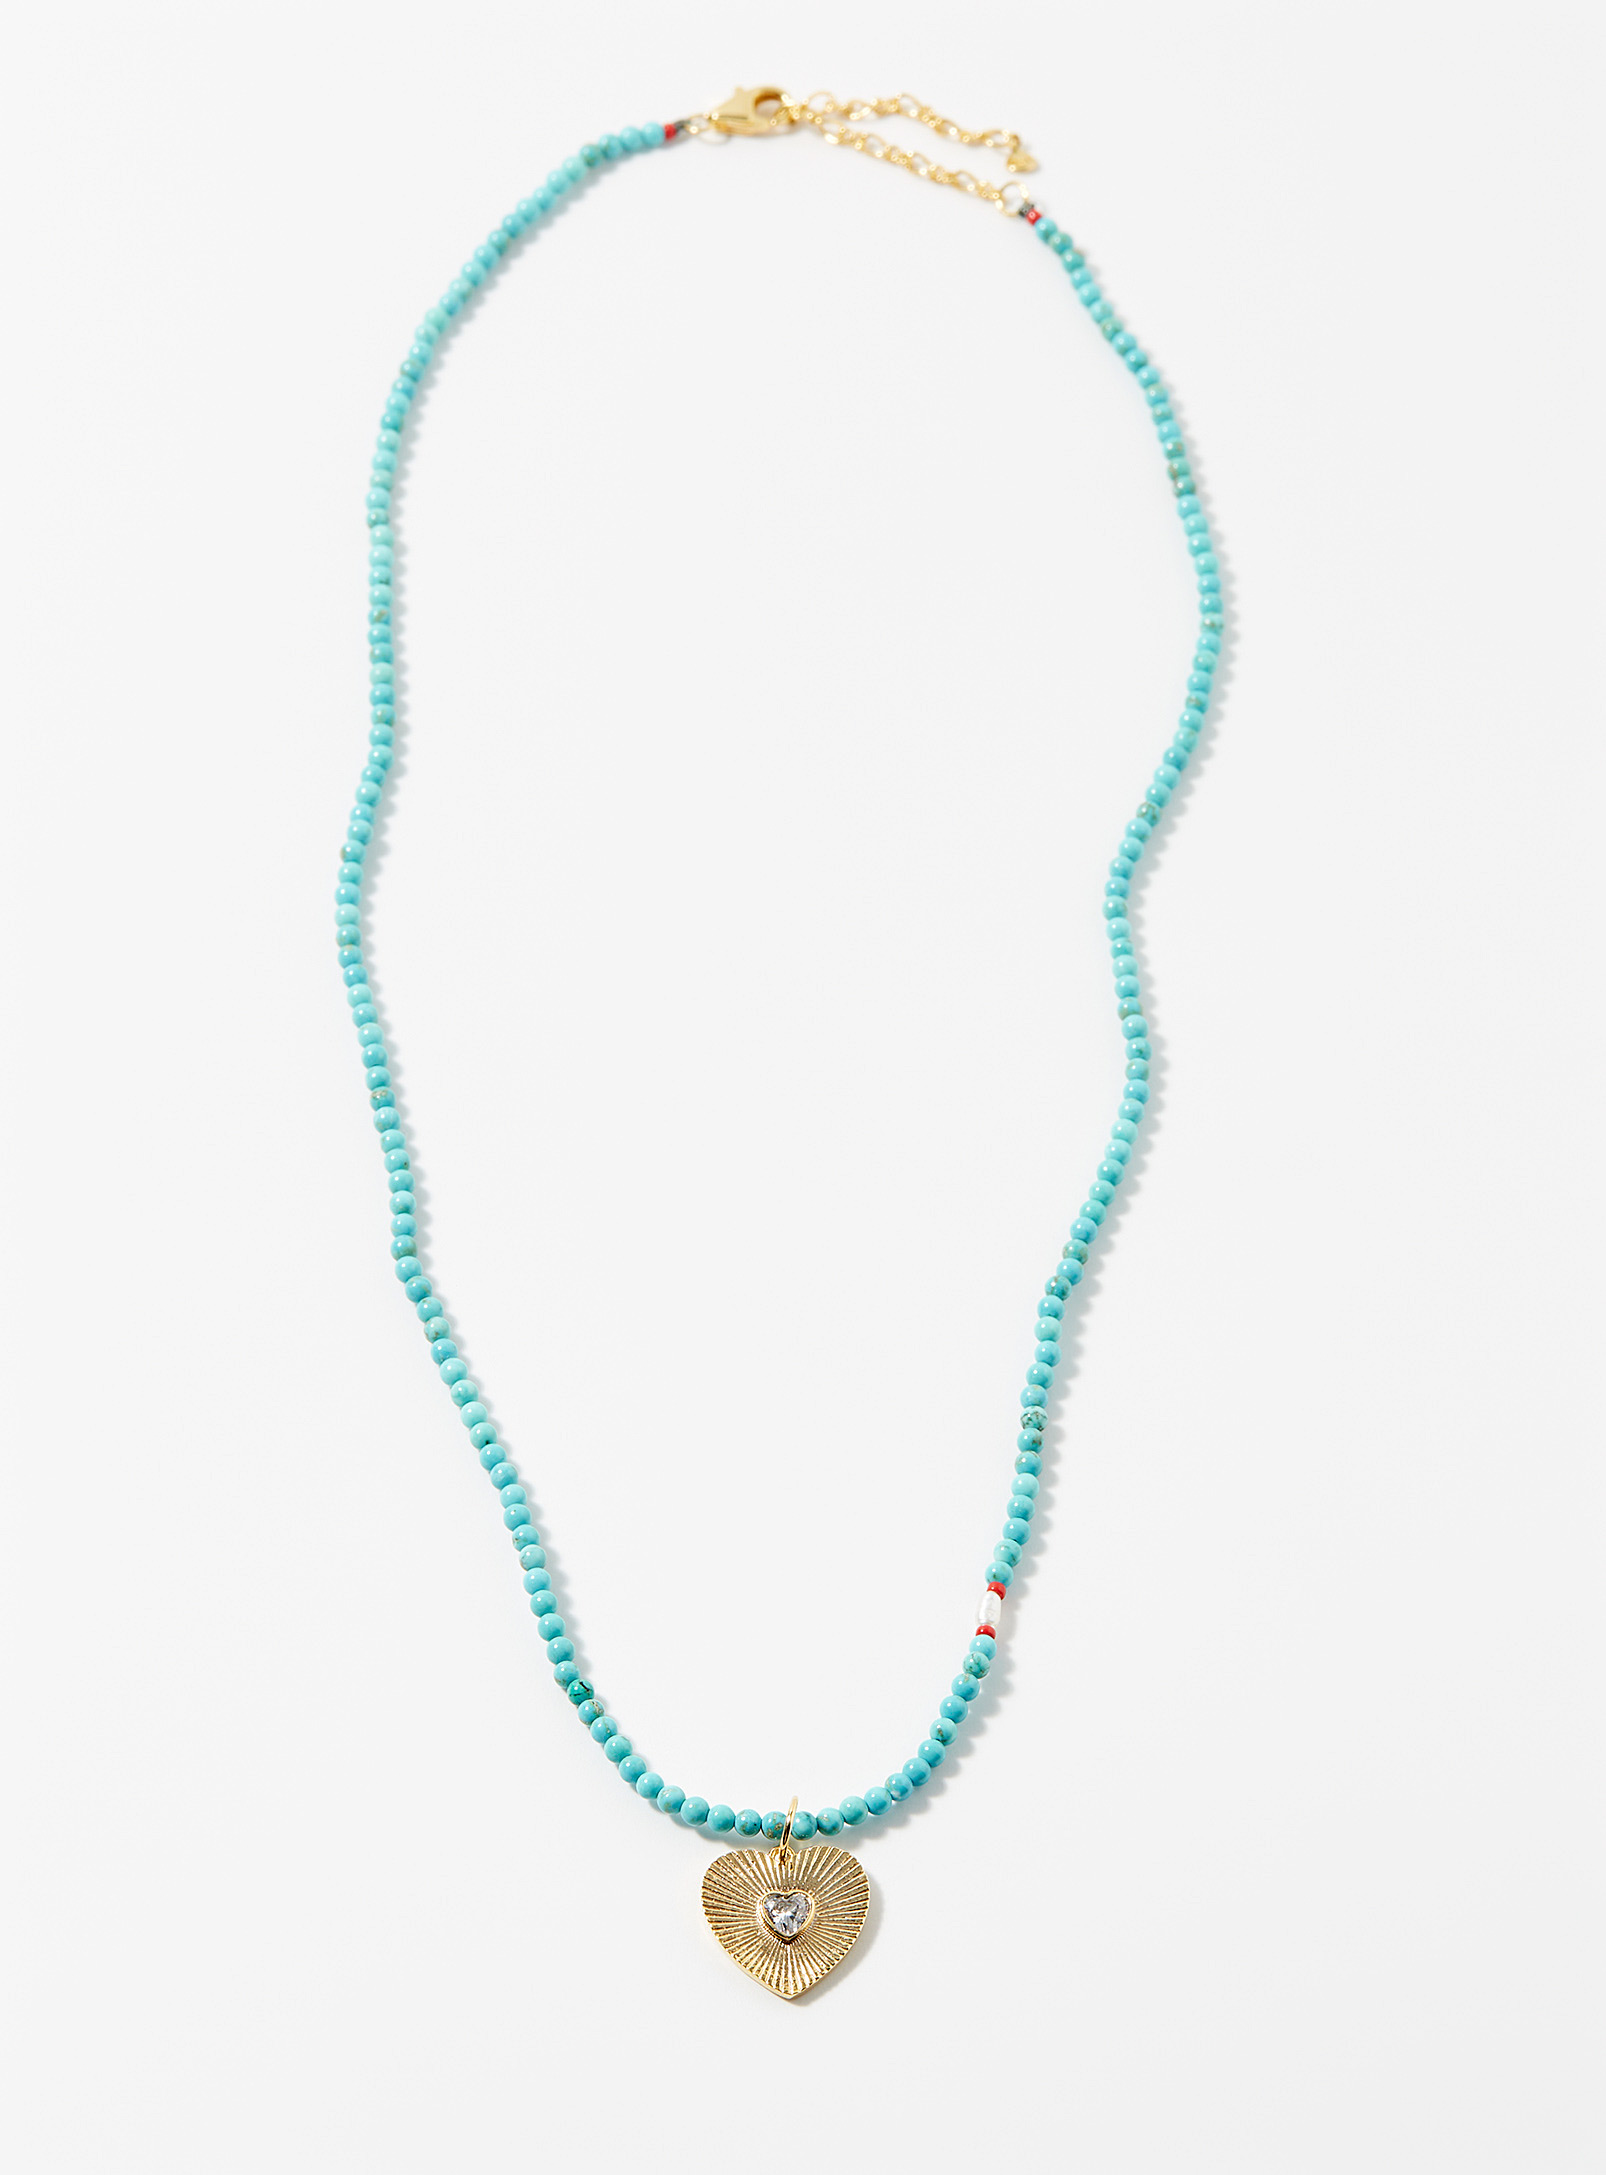 Tai Golden Heart Beaded Necklace In Teal